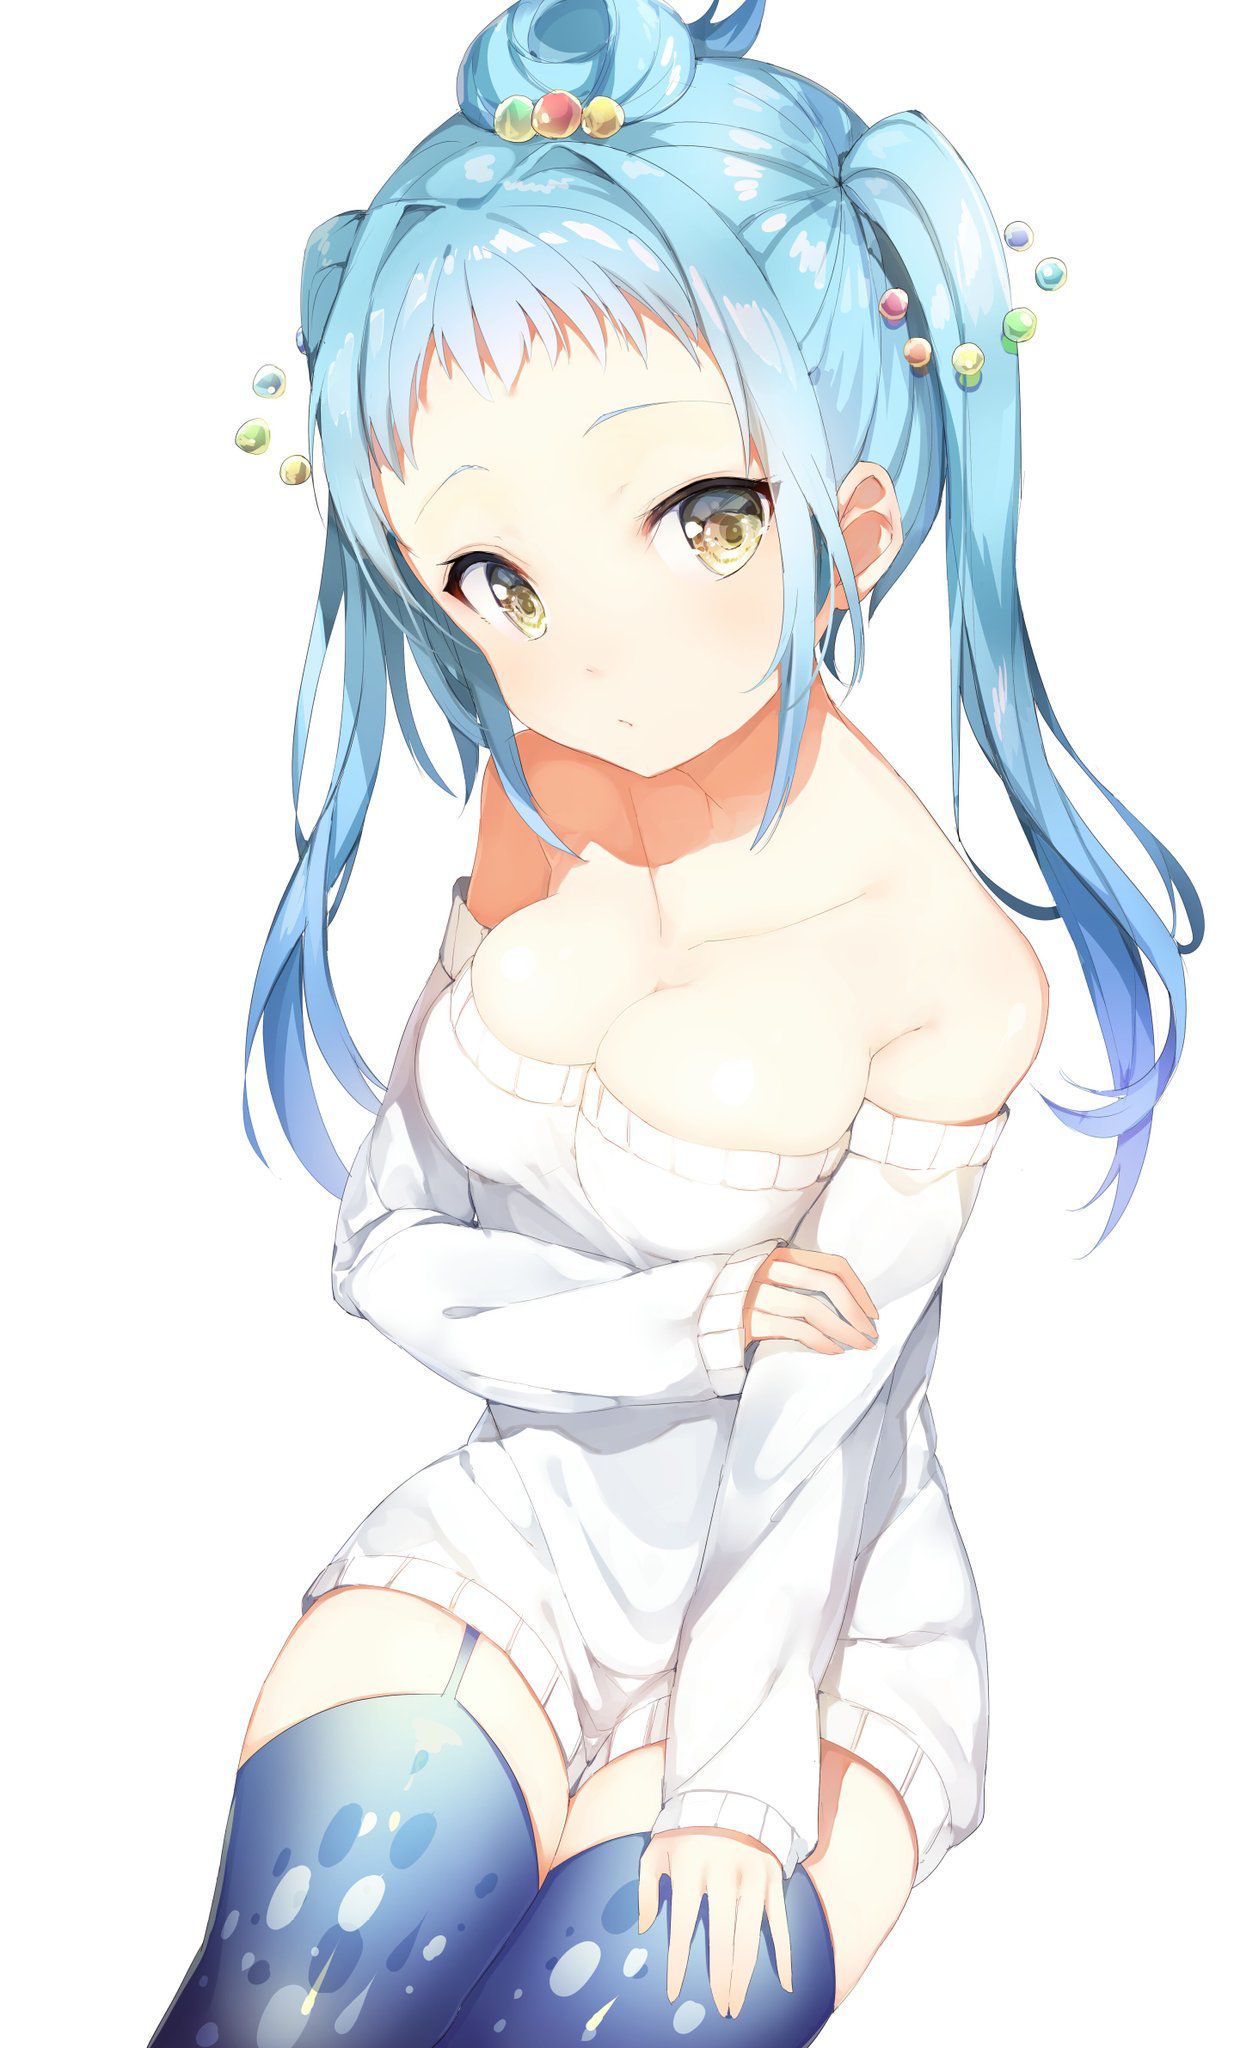 [2nd] Secondary erotic image of a girl with blue or light blue hair Part 7 [Blue hair] 13